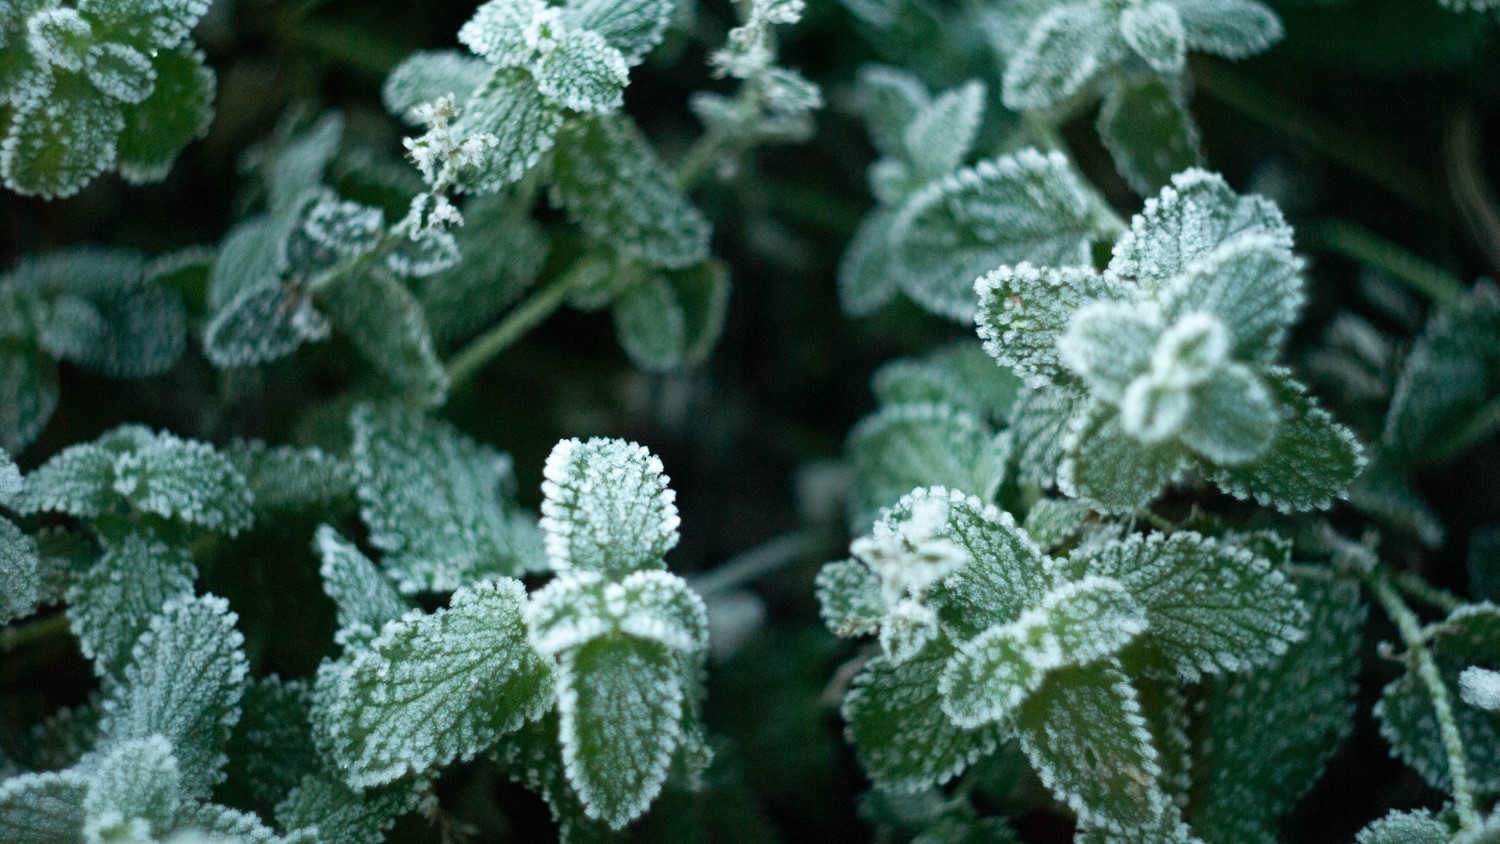 Frost covers a mint plant in a garden.